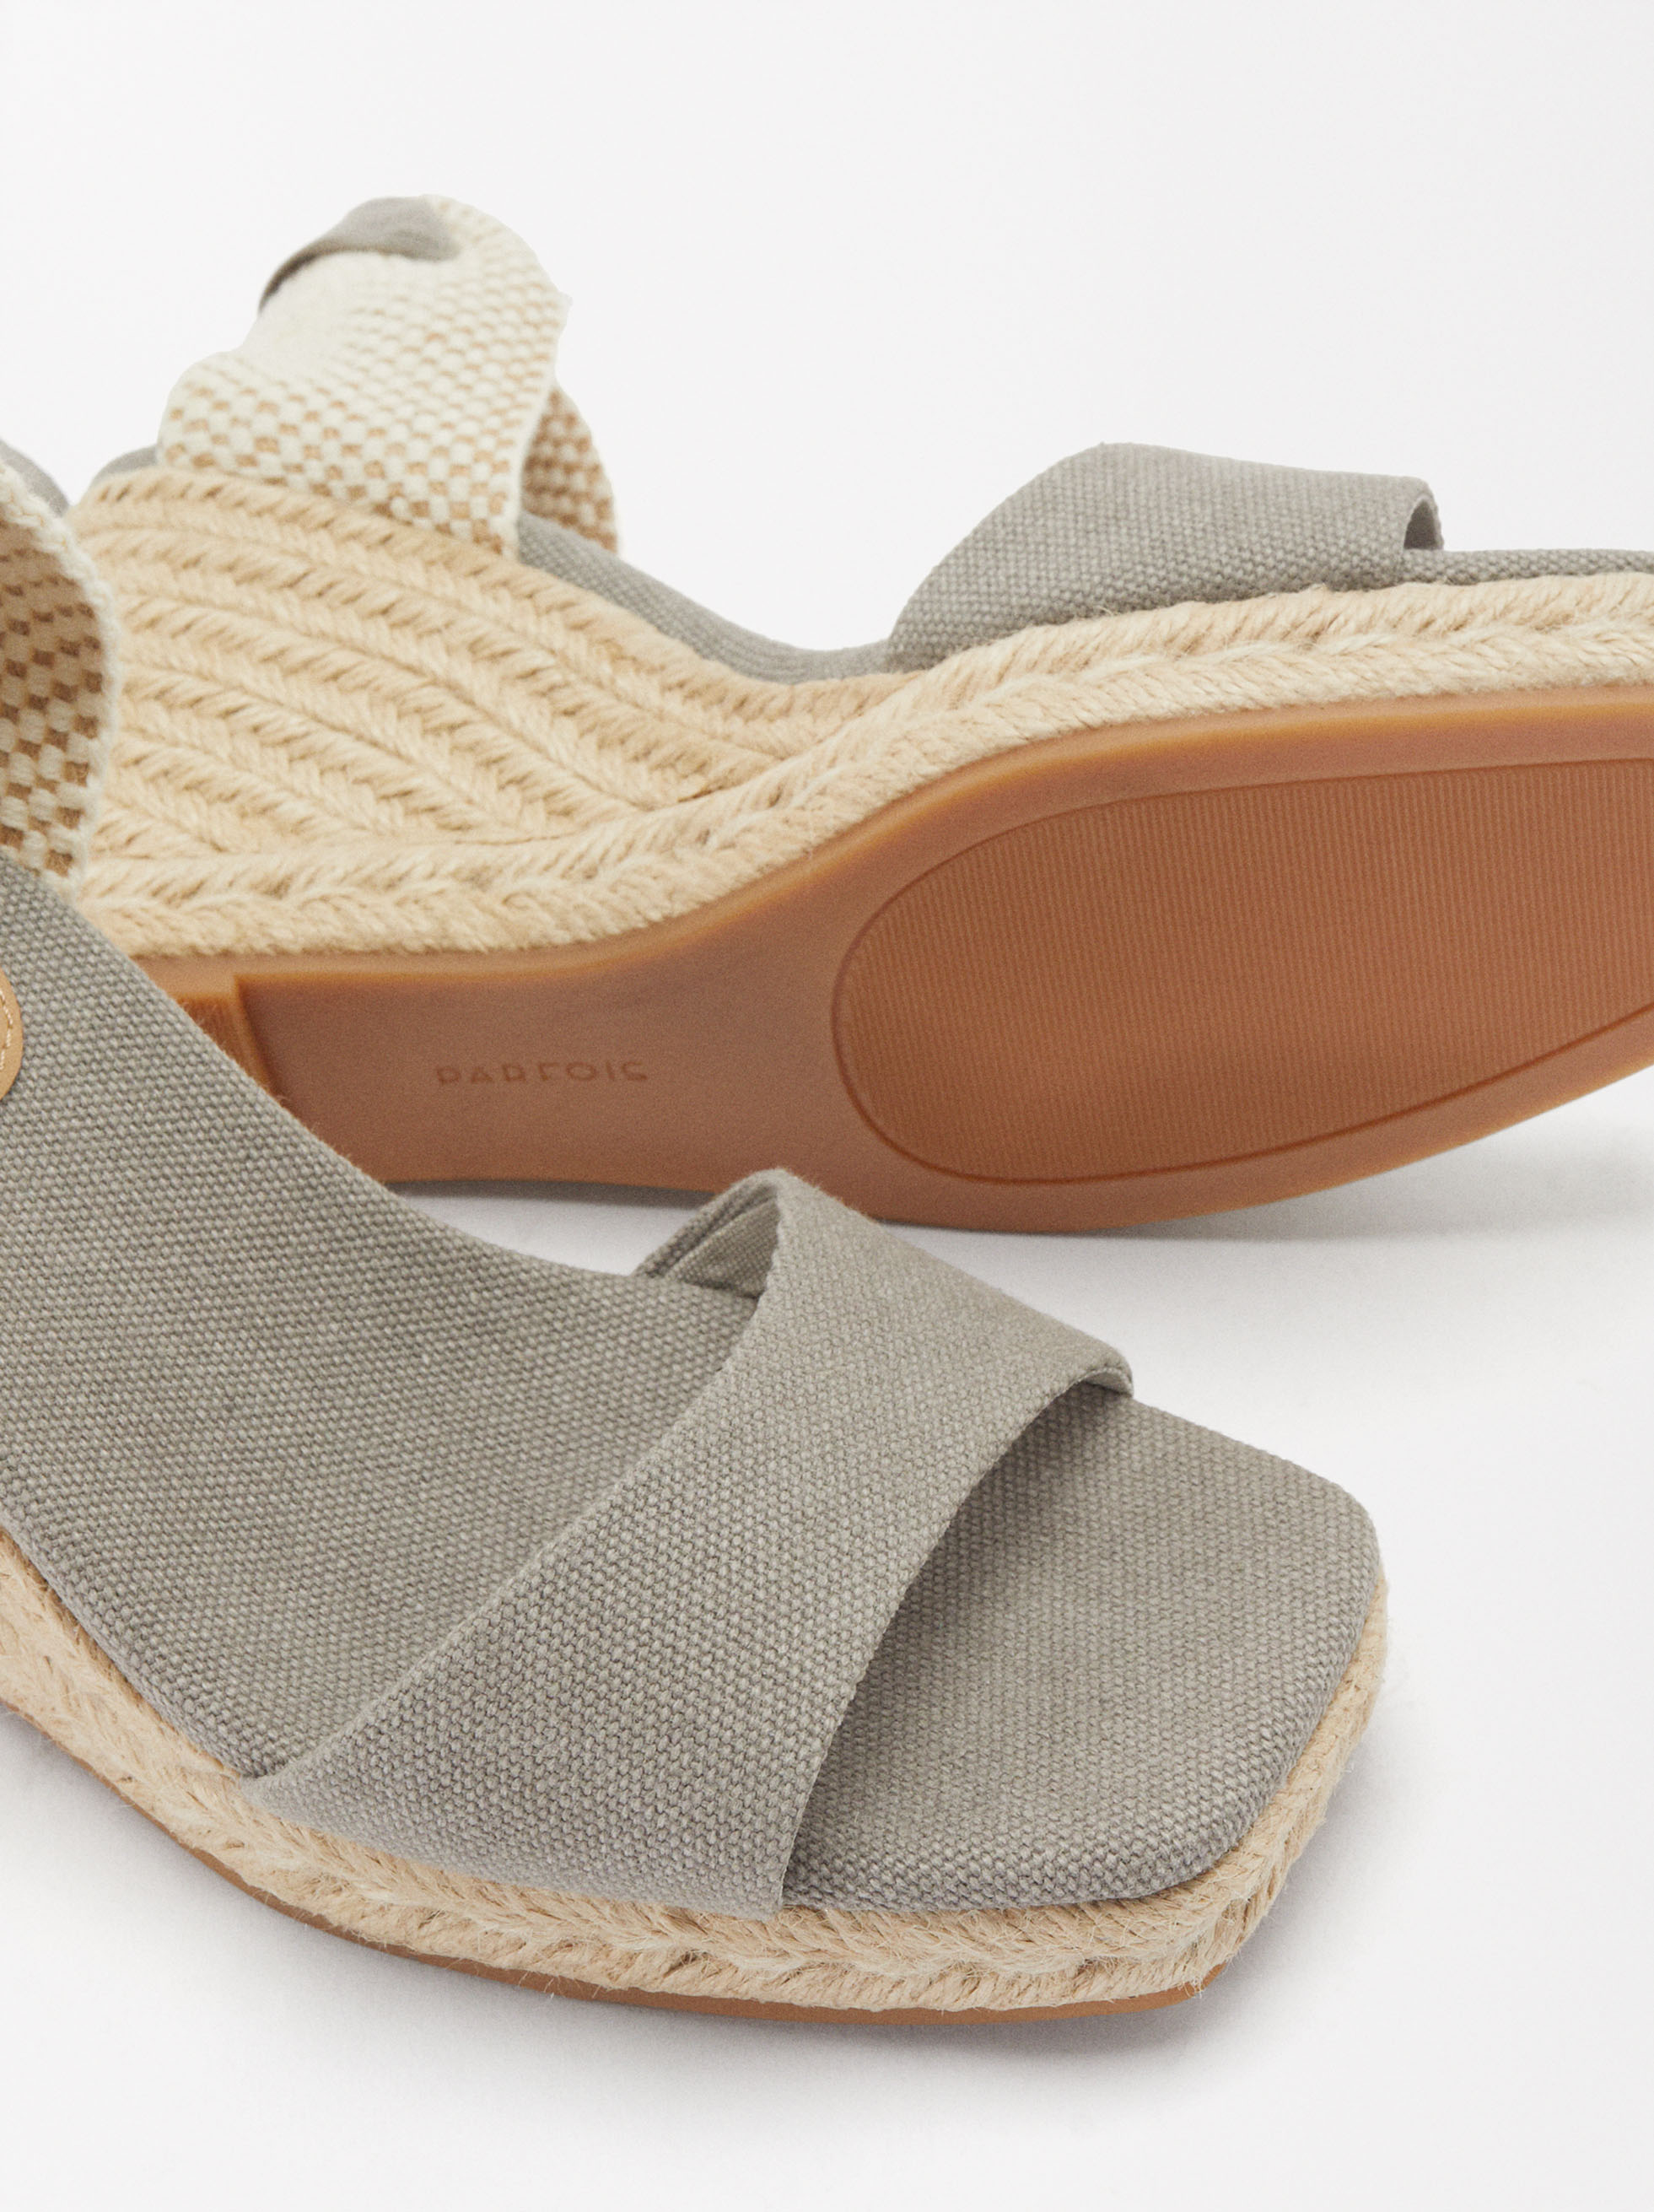 Wedge Sandal Fabric - Online Exclusive image number 4.0